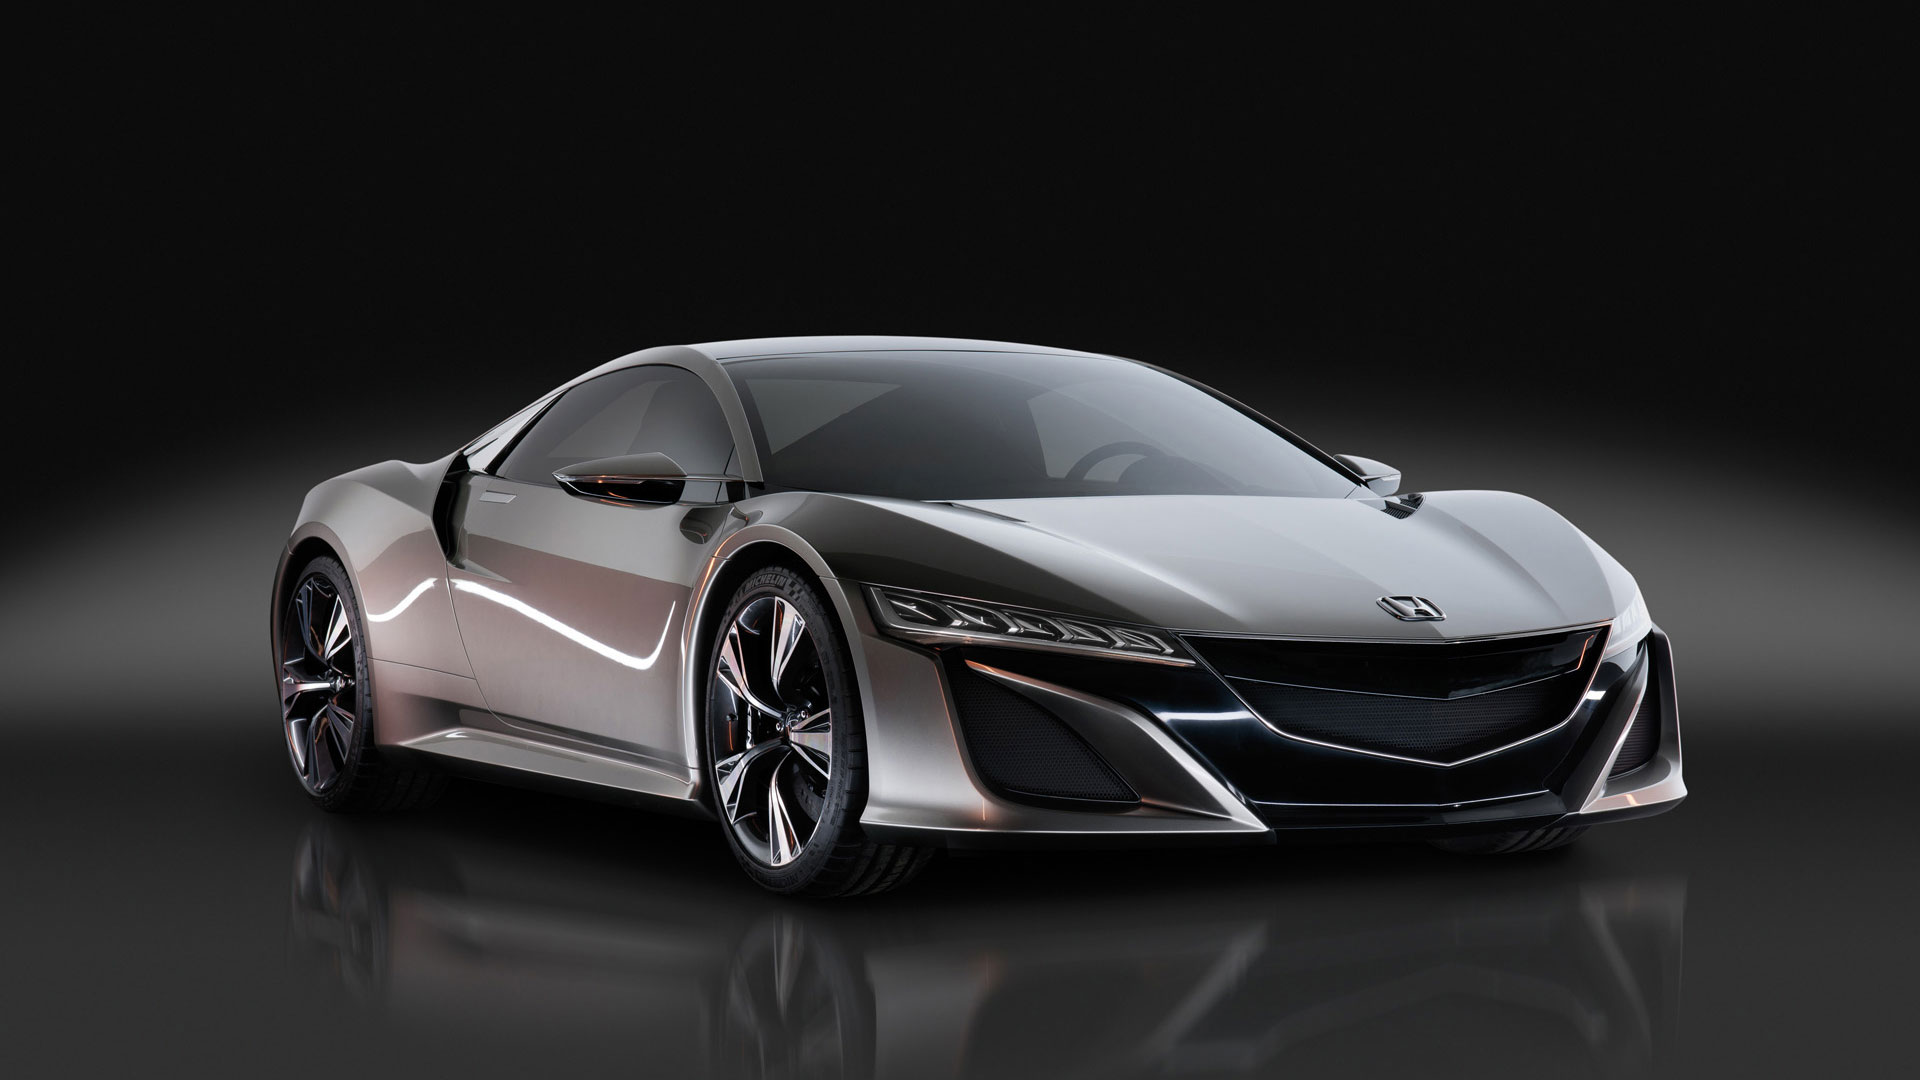 Free Download Honda Acura Nsx Wallpapers Pc 423 Wallpaper Cool Walldiskpapercom 1920x1080 For Your Desktop Mobile Tablet Explore 46 Acura Nsx Wallpapers Acura Nsx Wallpapers Acura Nsx Wallpaper Acura Nsx 2017 Wallpaper